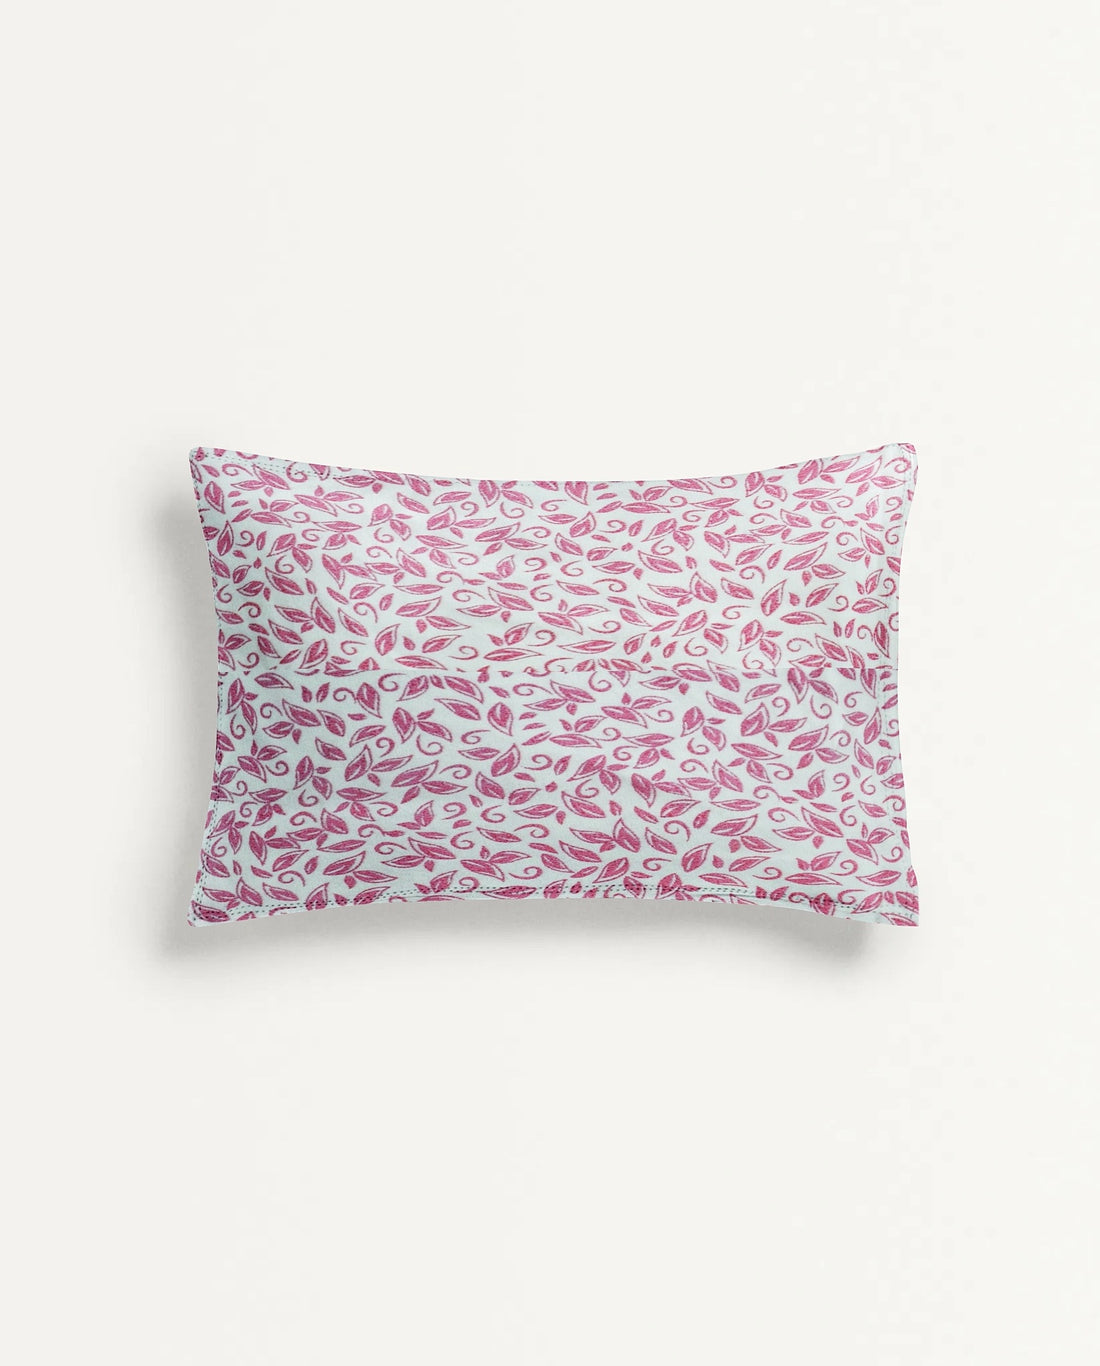 ‘Red Flower’ Organic Baby Pillow Cover